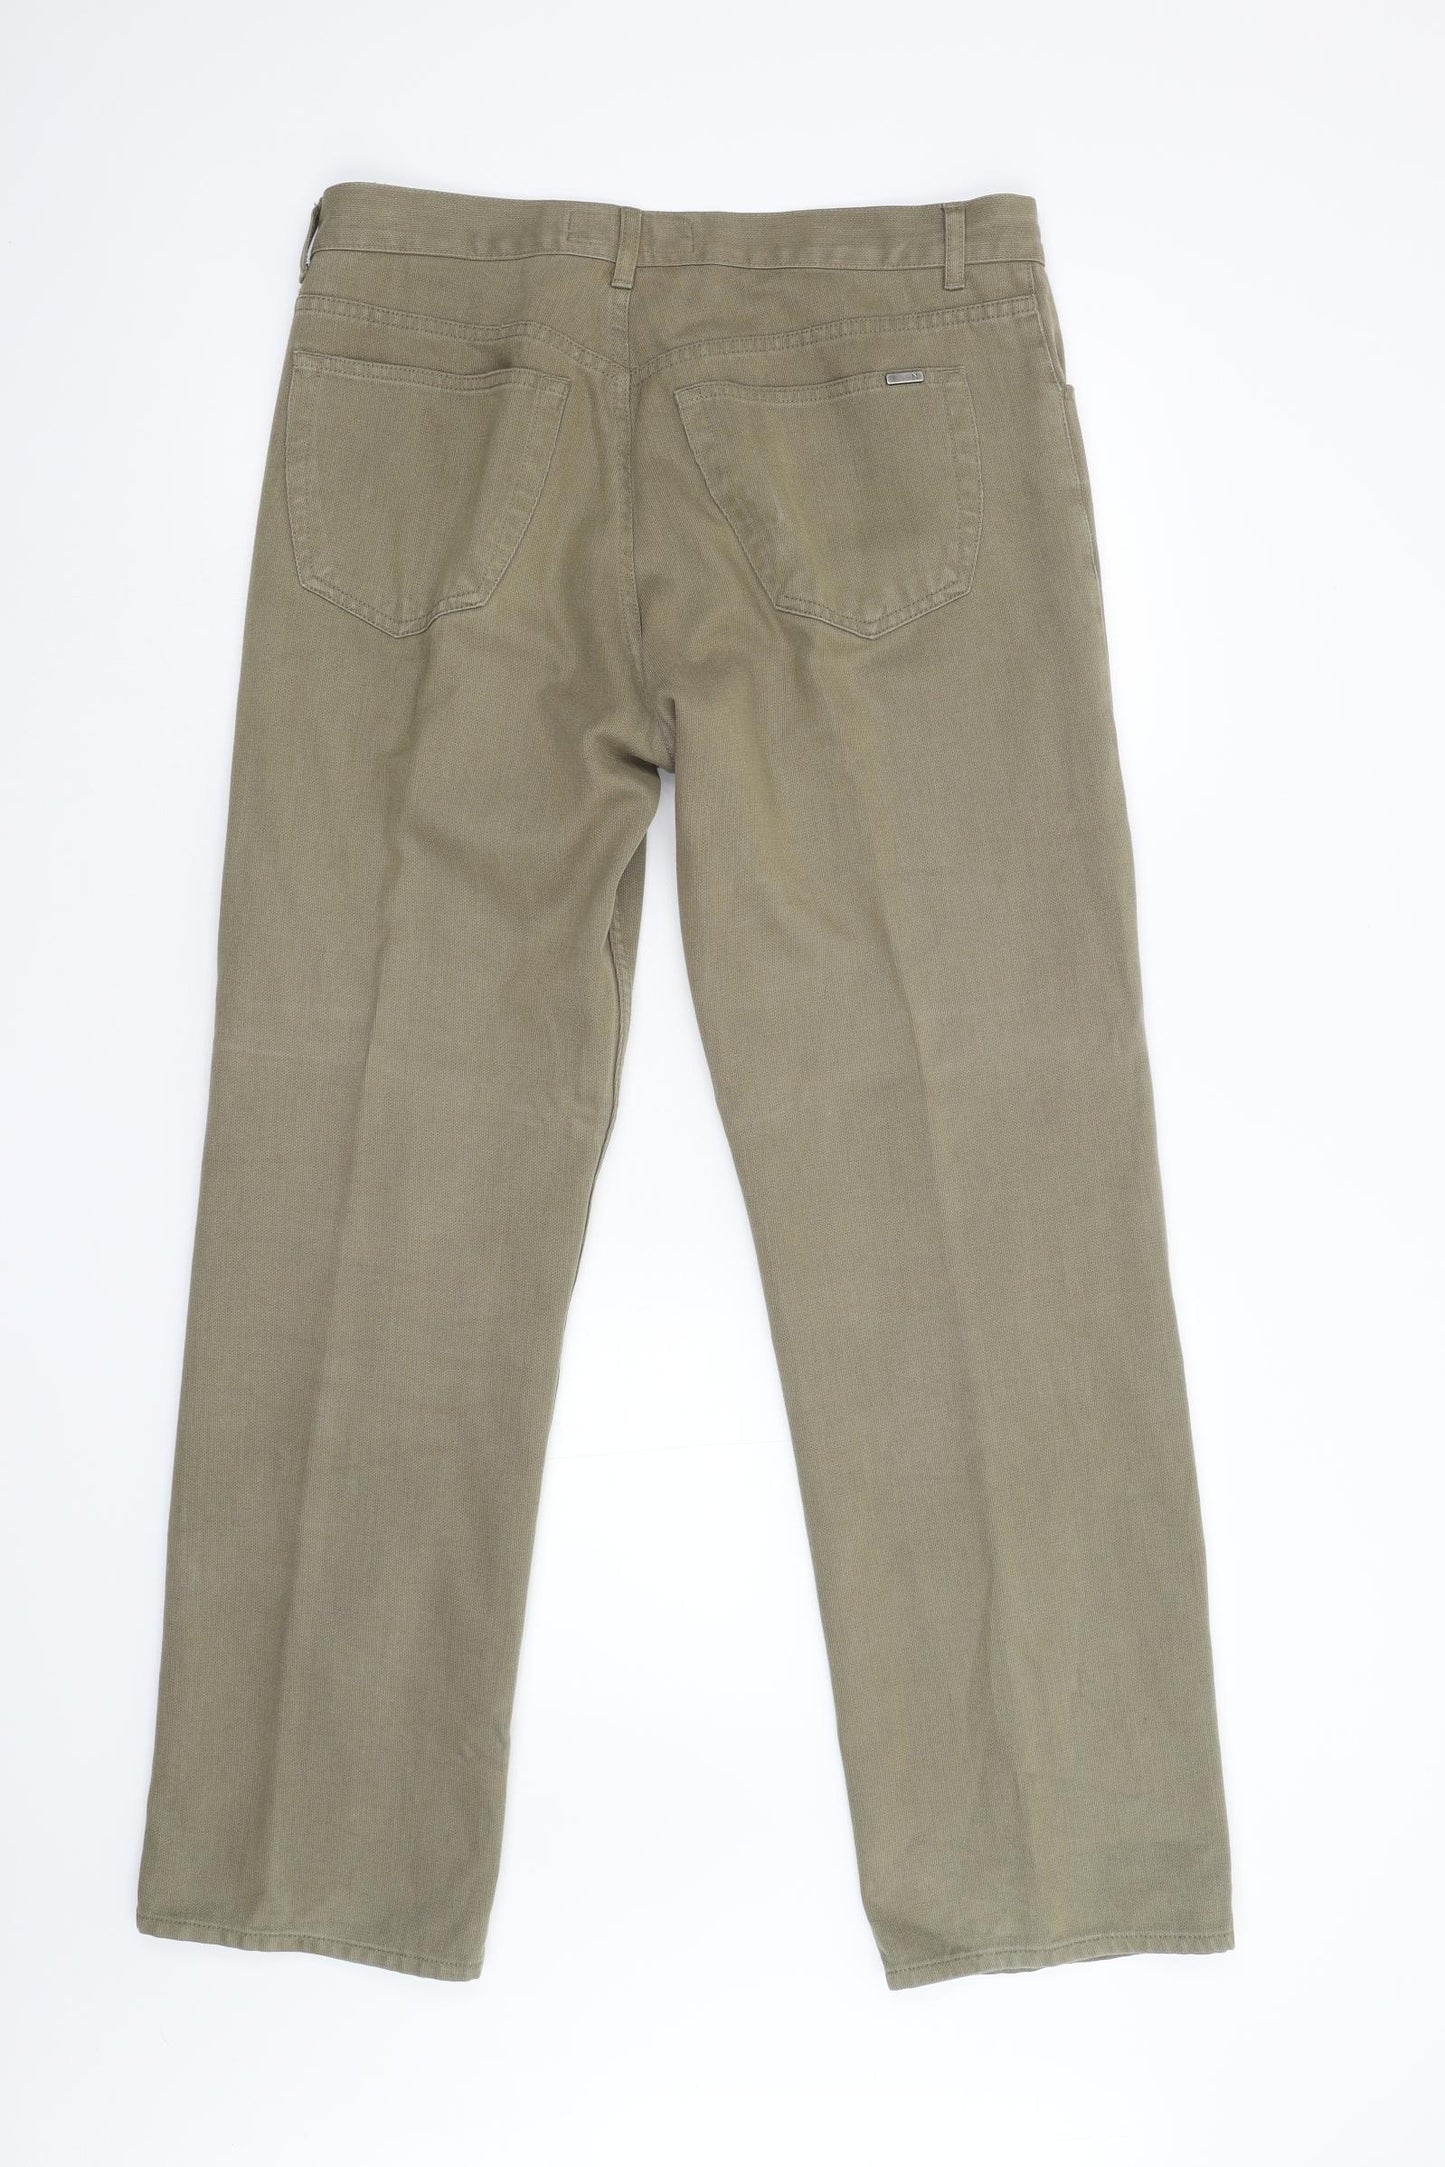 NEXT Mens Green   Trousers  Size 34 L31 in